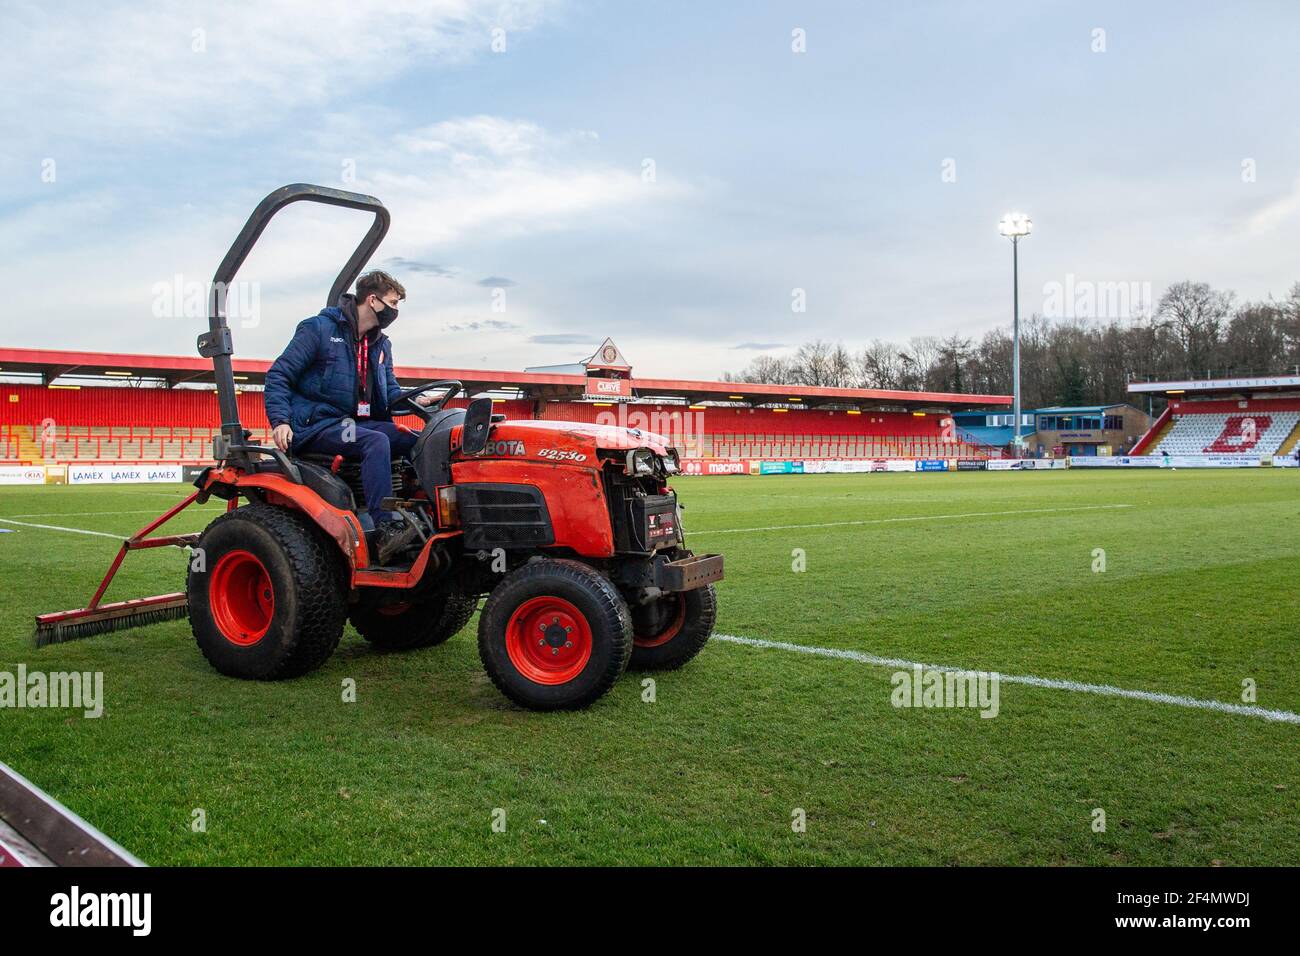 Groundsman riding tractor and maintaining football pitch at Lamex Stadium, Stevenage Football Club, Hertfordshire Stock Photo